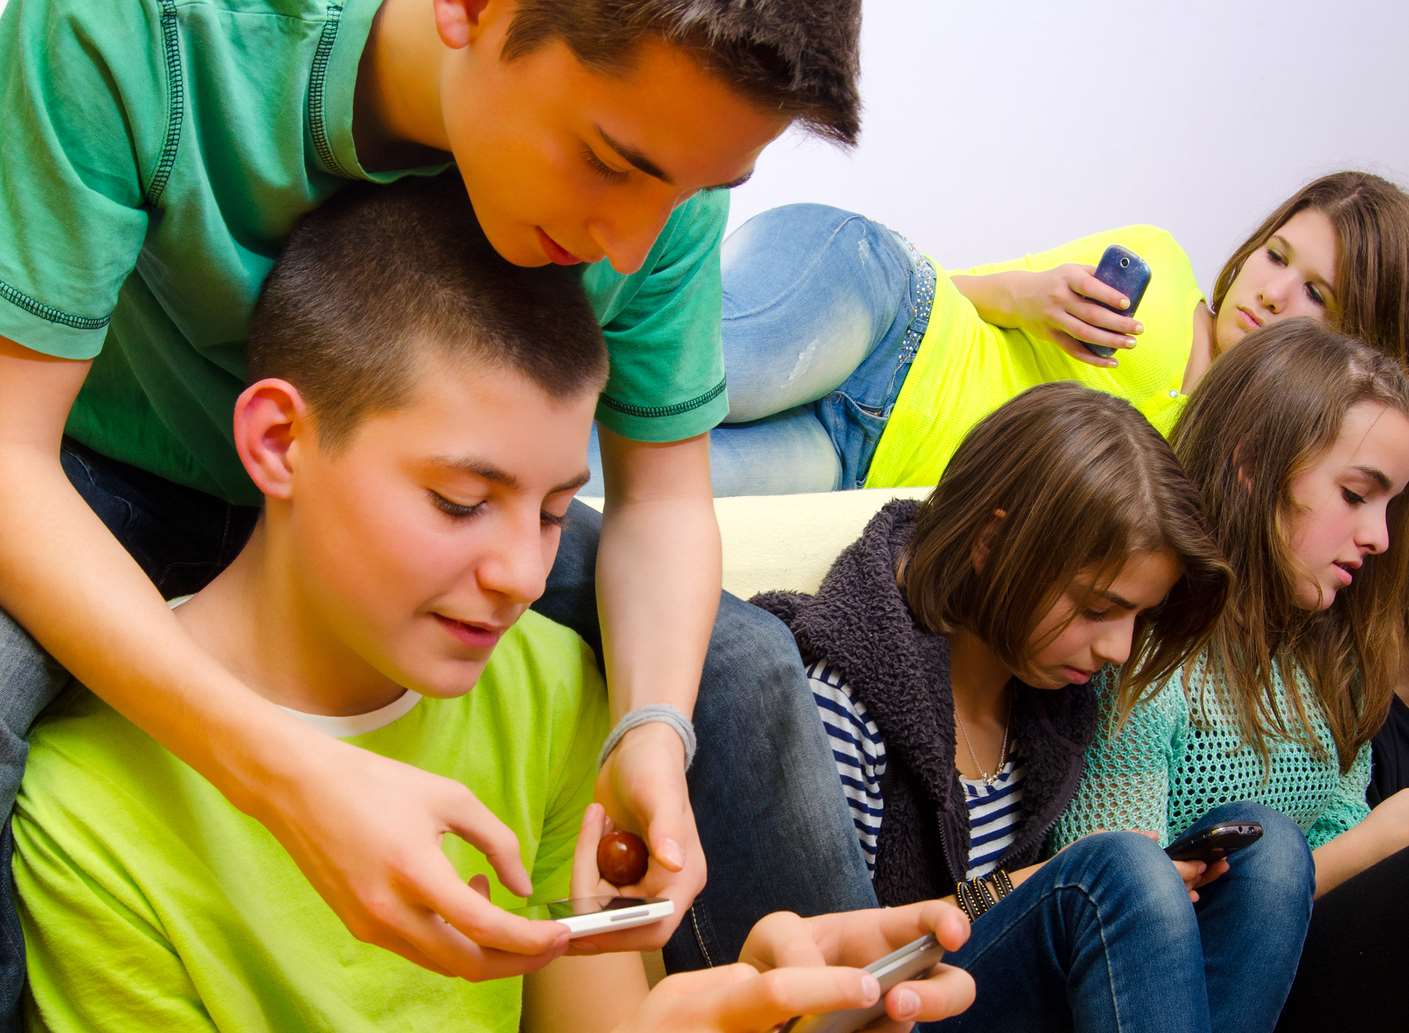 Communication for teenagers is different than it was for their parents